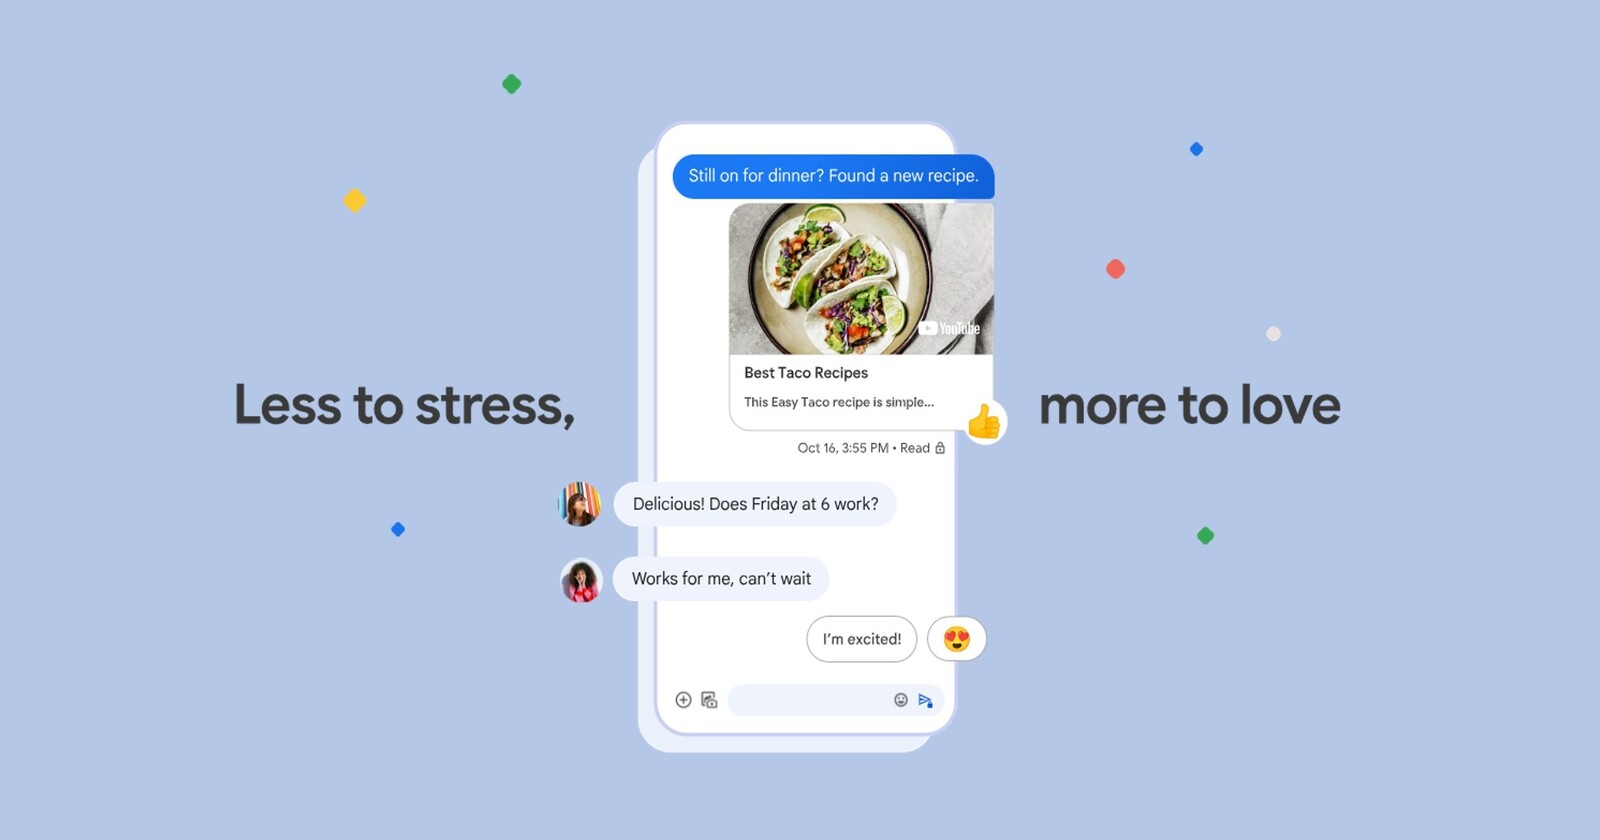 Google Messages RCS chats might get a background wallpaper to make them stand out